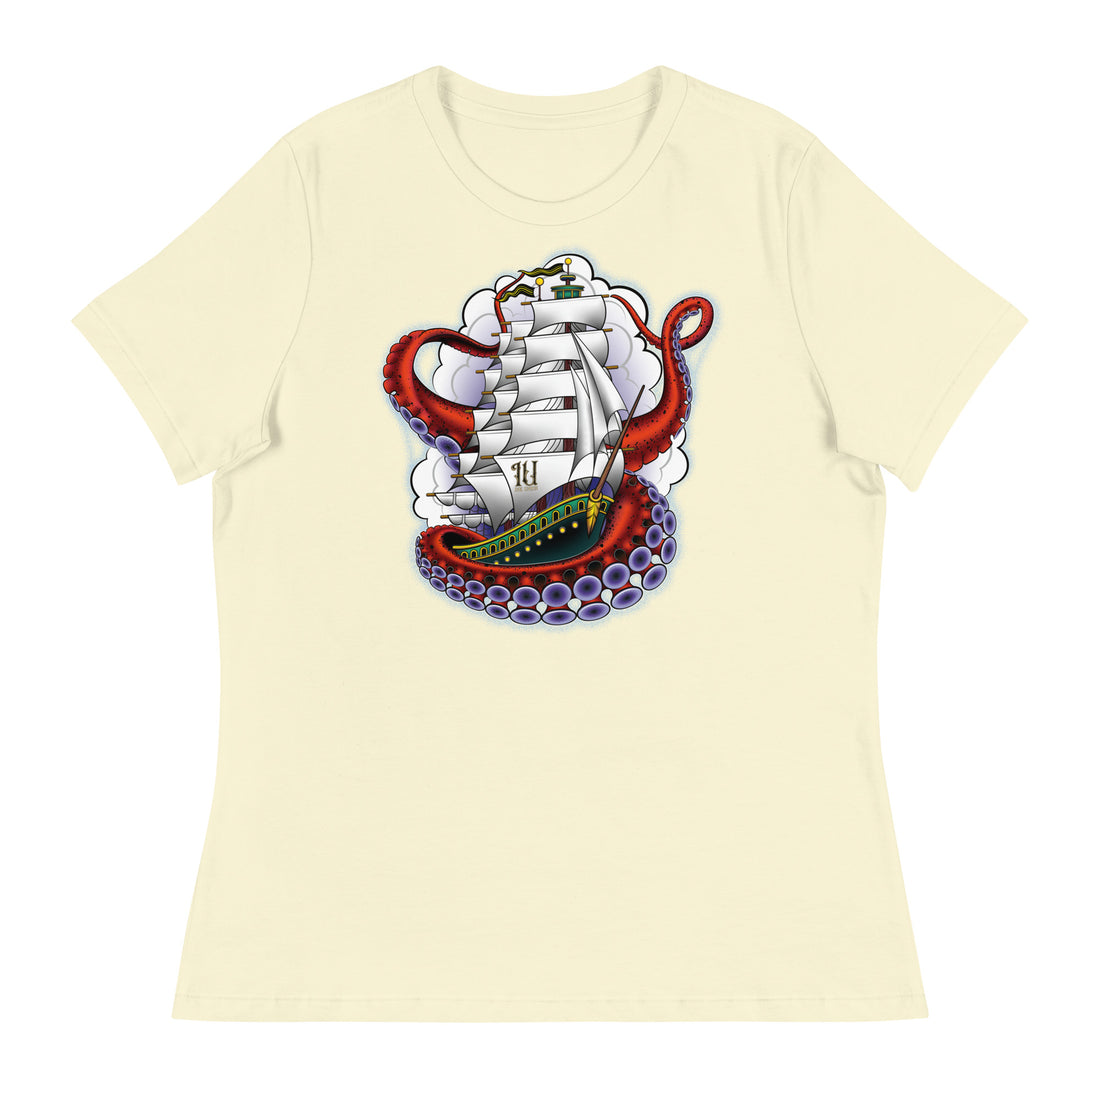 A light yellow t-shirt with an old-school clipper ship tattoo design in green and brown with white sails surrounded by octopus tentacles in shades of red with purple tentacles. Behind the ship are purple-tinged clouds.